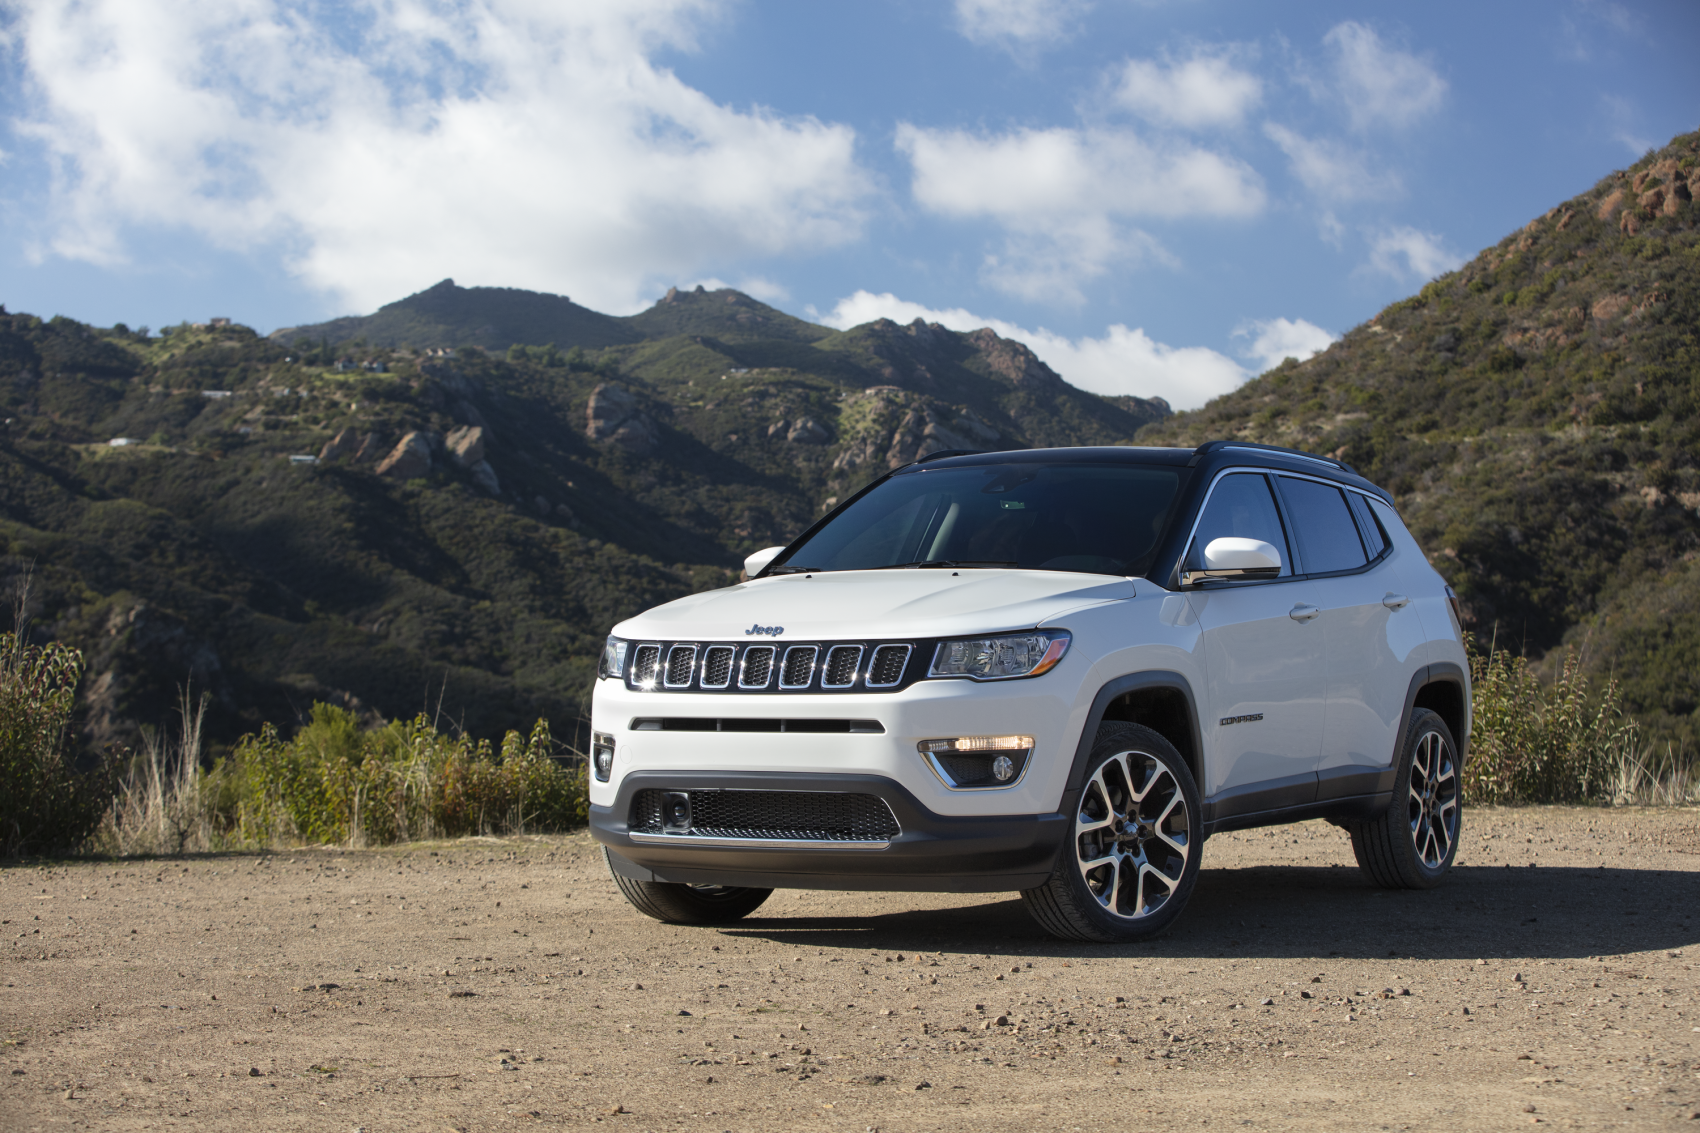 2021 Jeep Compass White Mountains Thornhill Chrysler Dodge Jeep Ram